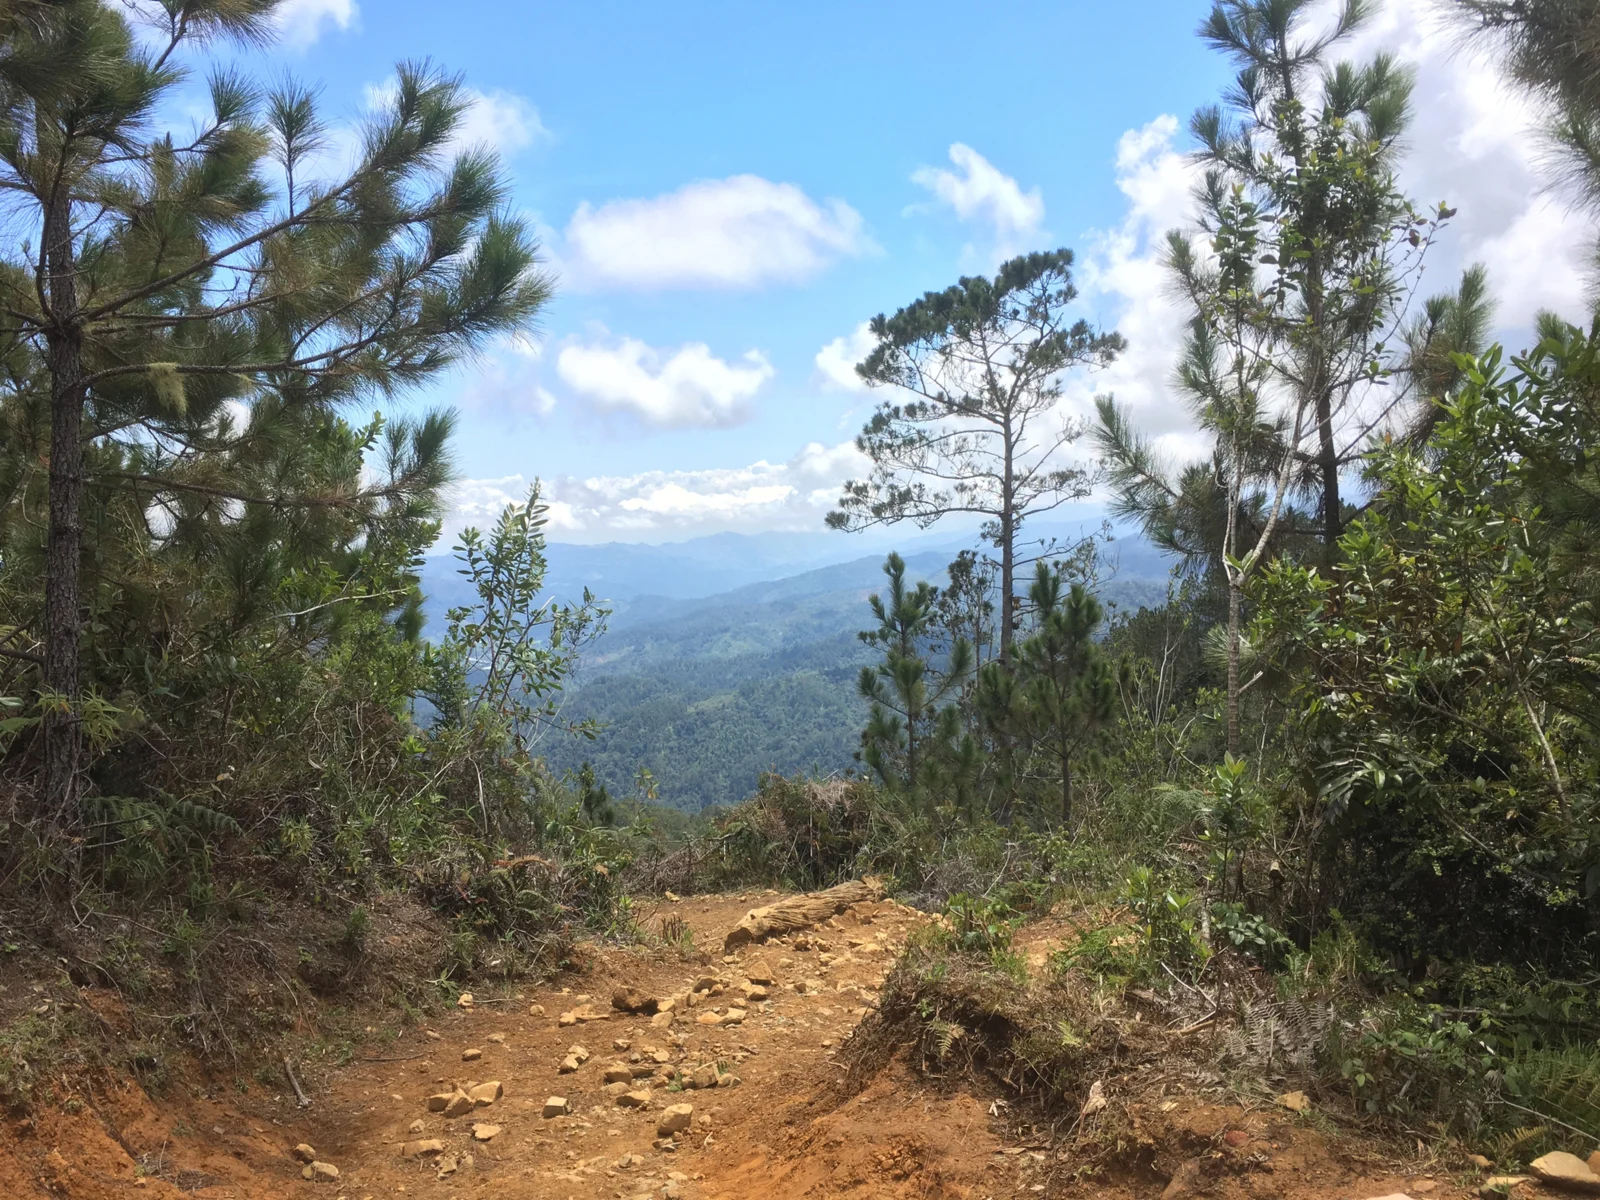 Trailhead opening at the El Pico Duarte, one of the Dominican's best places to visit